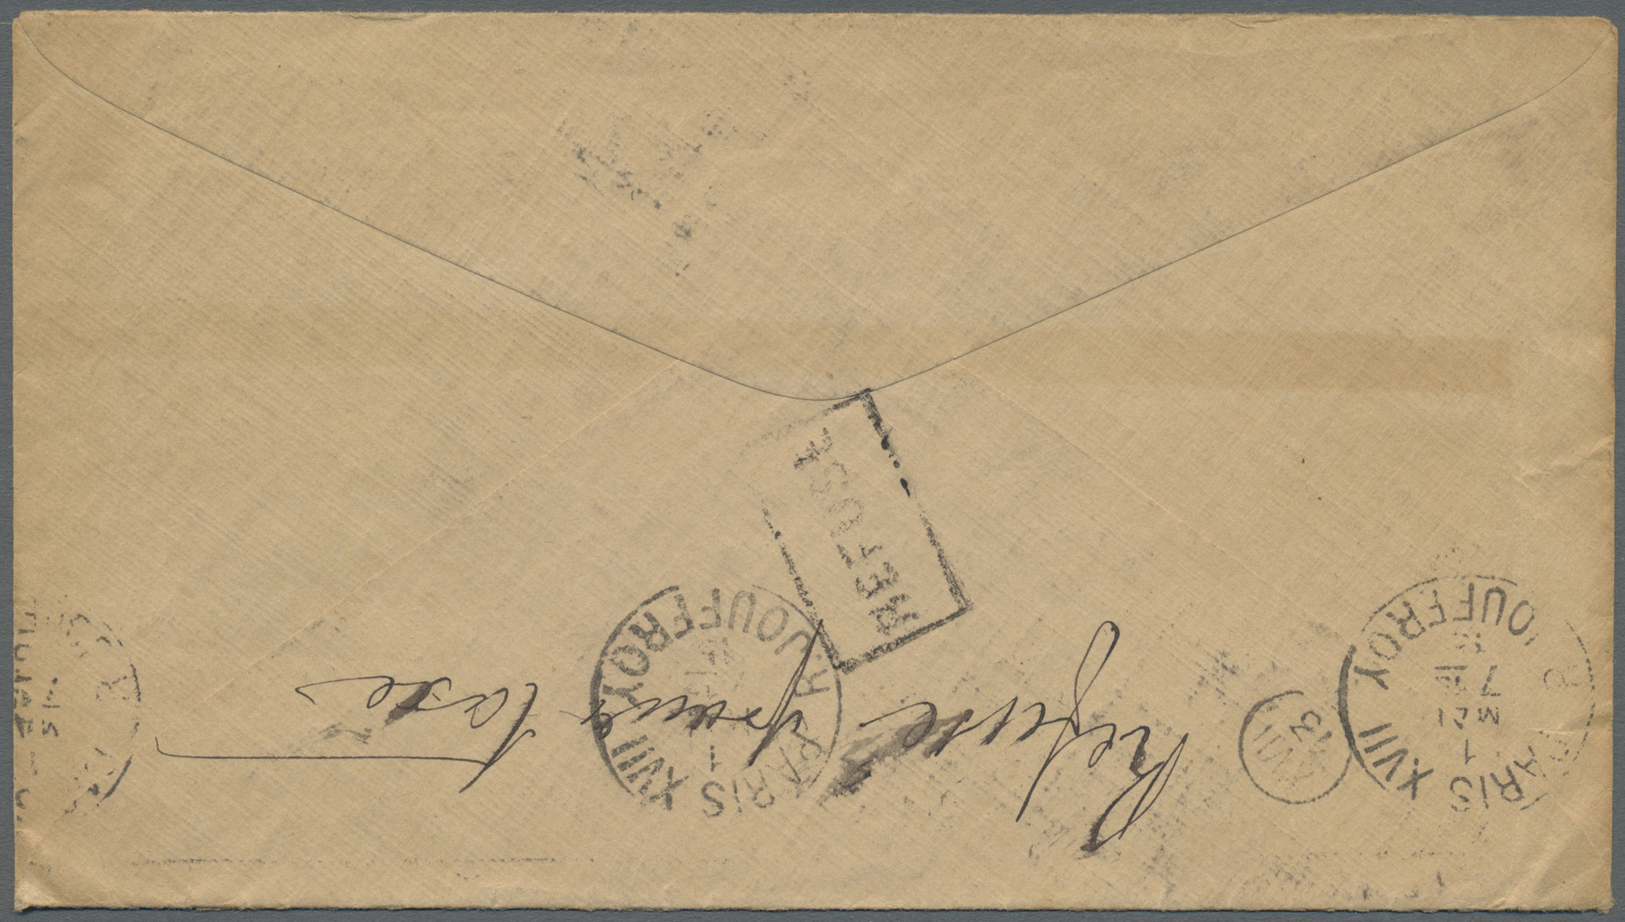 Br Frankreich - Portomarken: 1915, 10c. Brown And 20c. Olive On Incoming Cover From FLUSHING/USA To PARIS, Which - 1859-1959 Covers & Documents